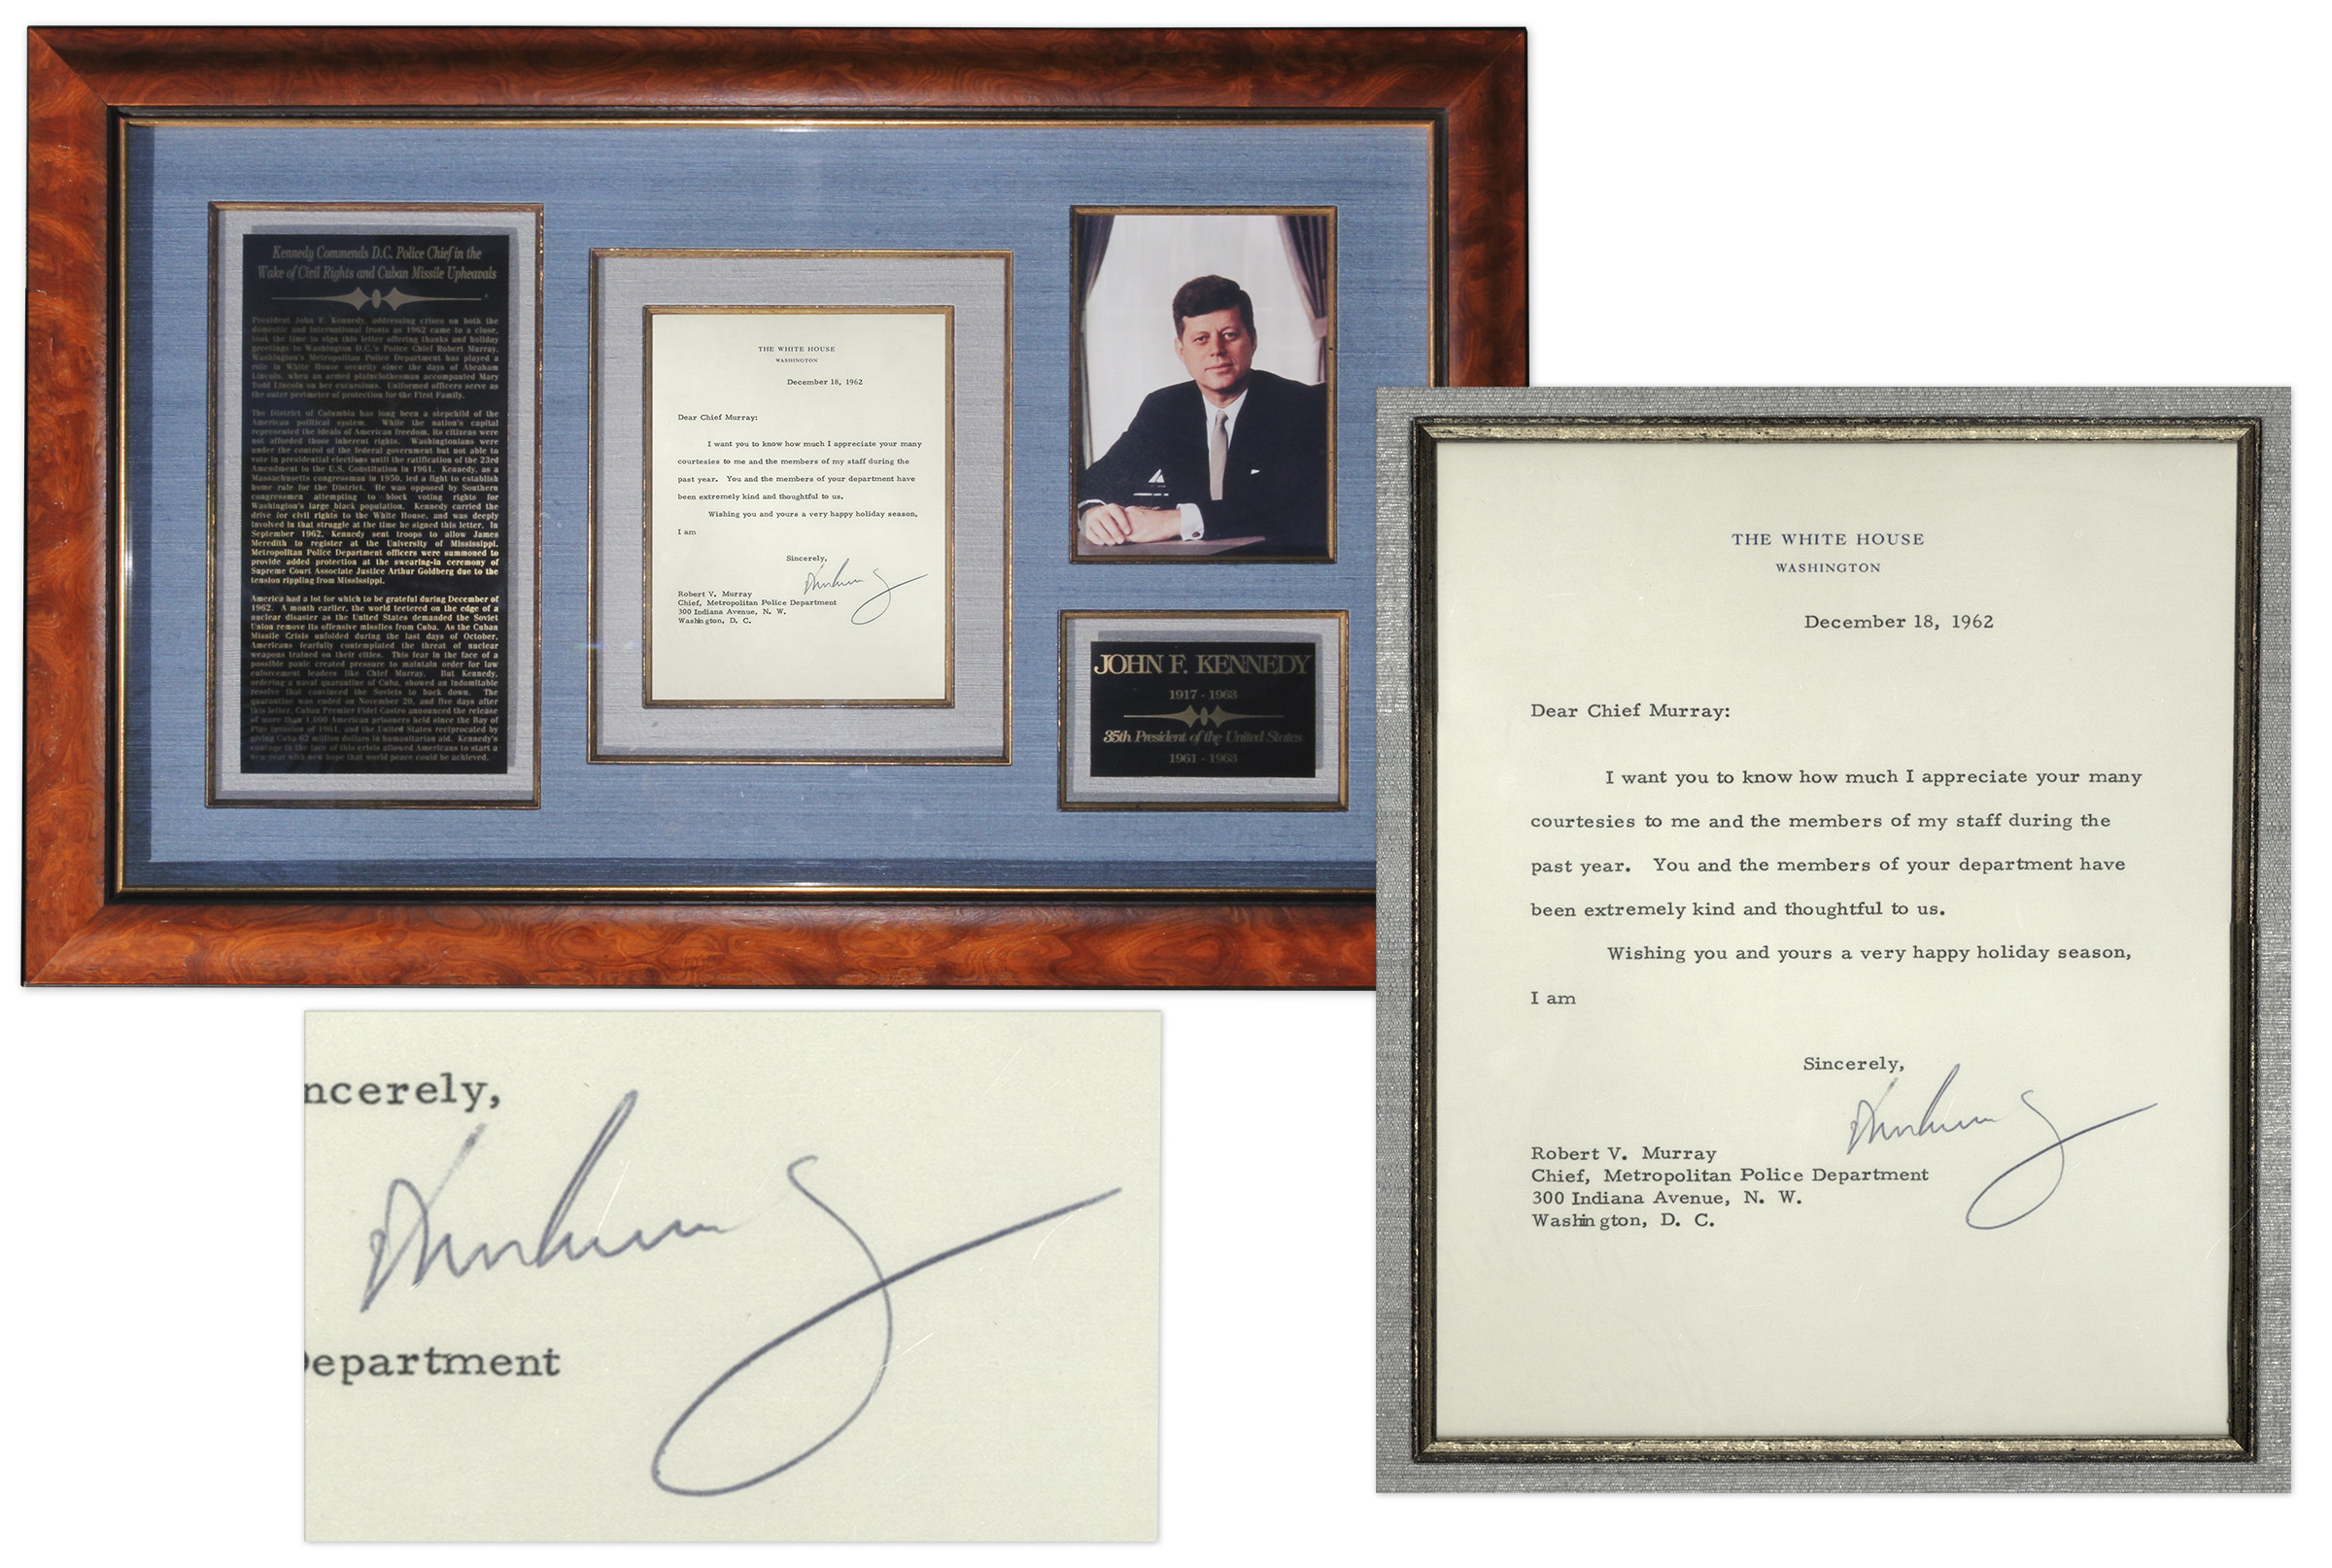 John F Kennedy Autograph John F. Kennedy Letter Signed as President -- Sent to DC Police Chief: ''...You and the members of your department have been very kind and thoughtful to us...'' -- With University Archives COA